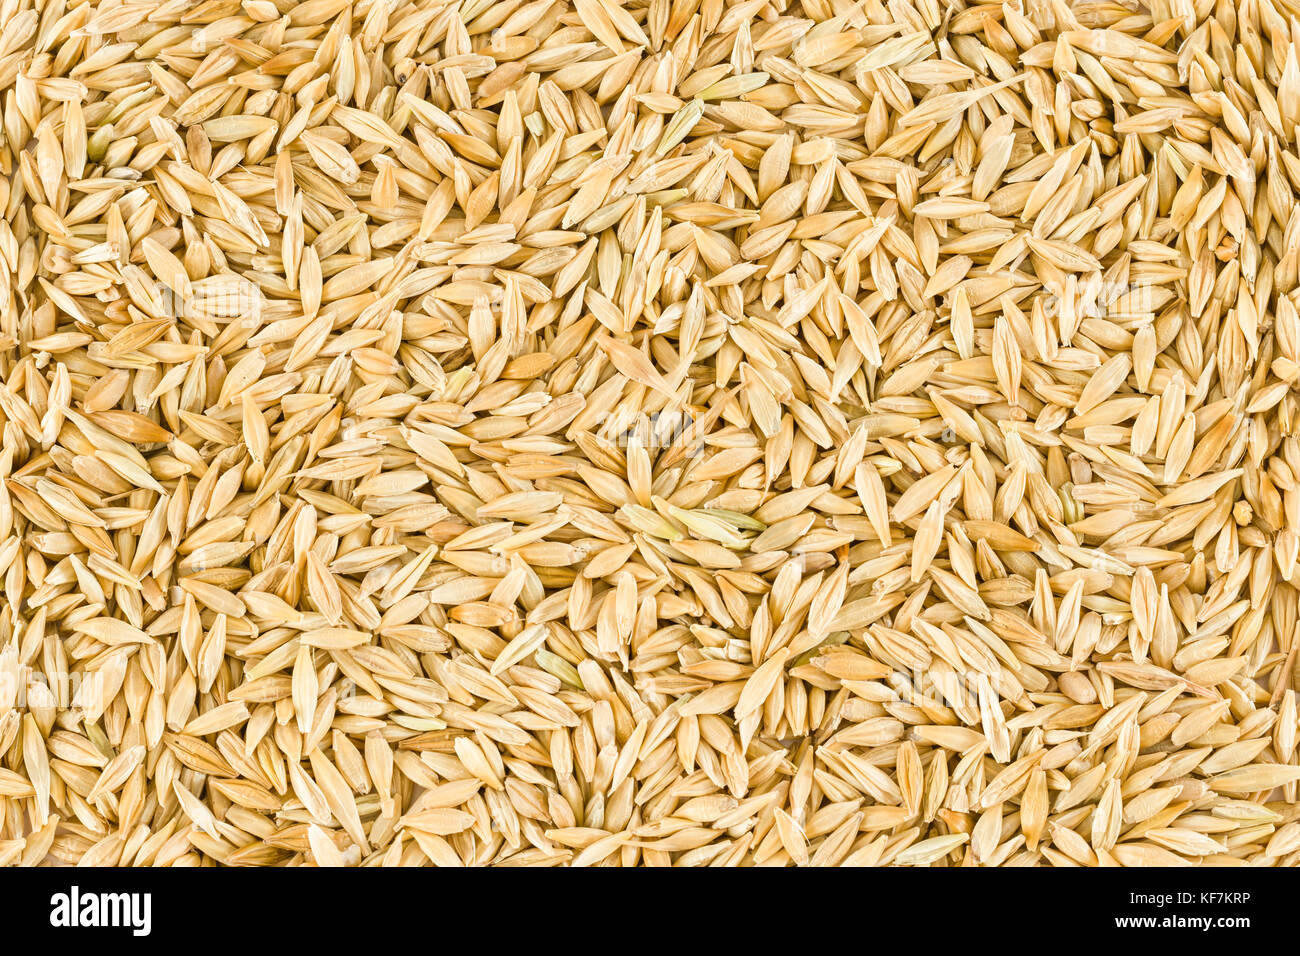 Barley Grains filled in as background Stock Photo